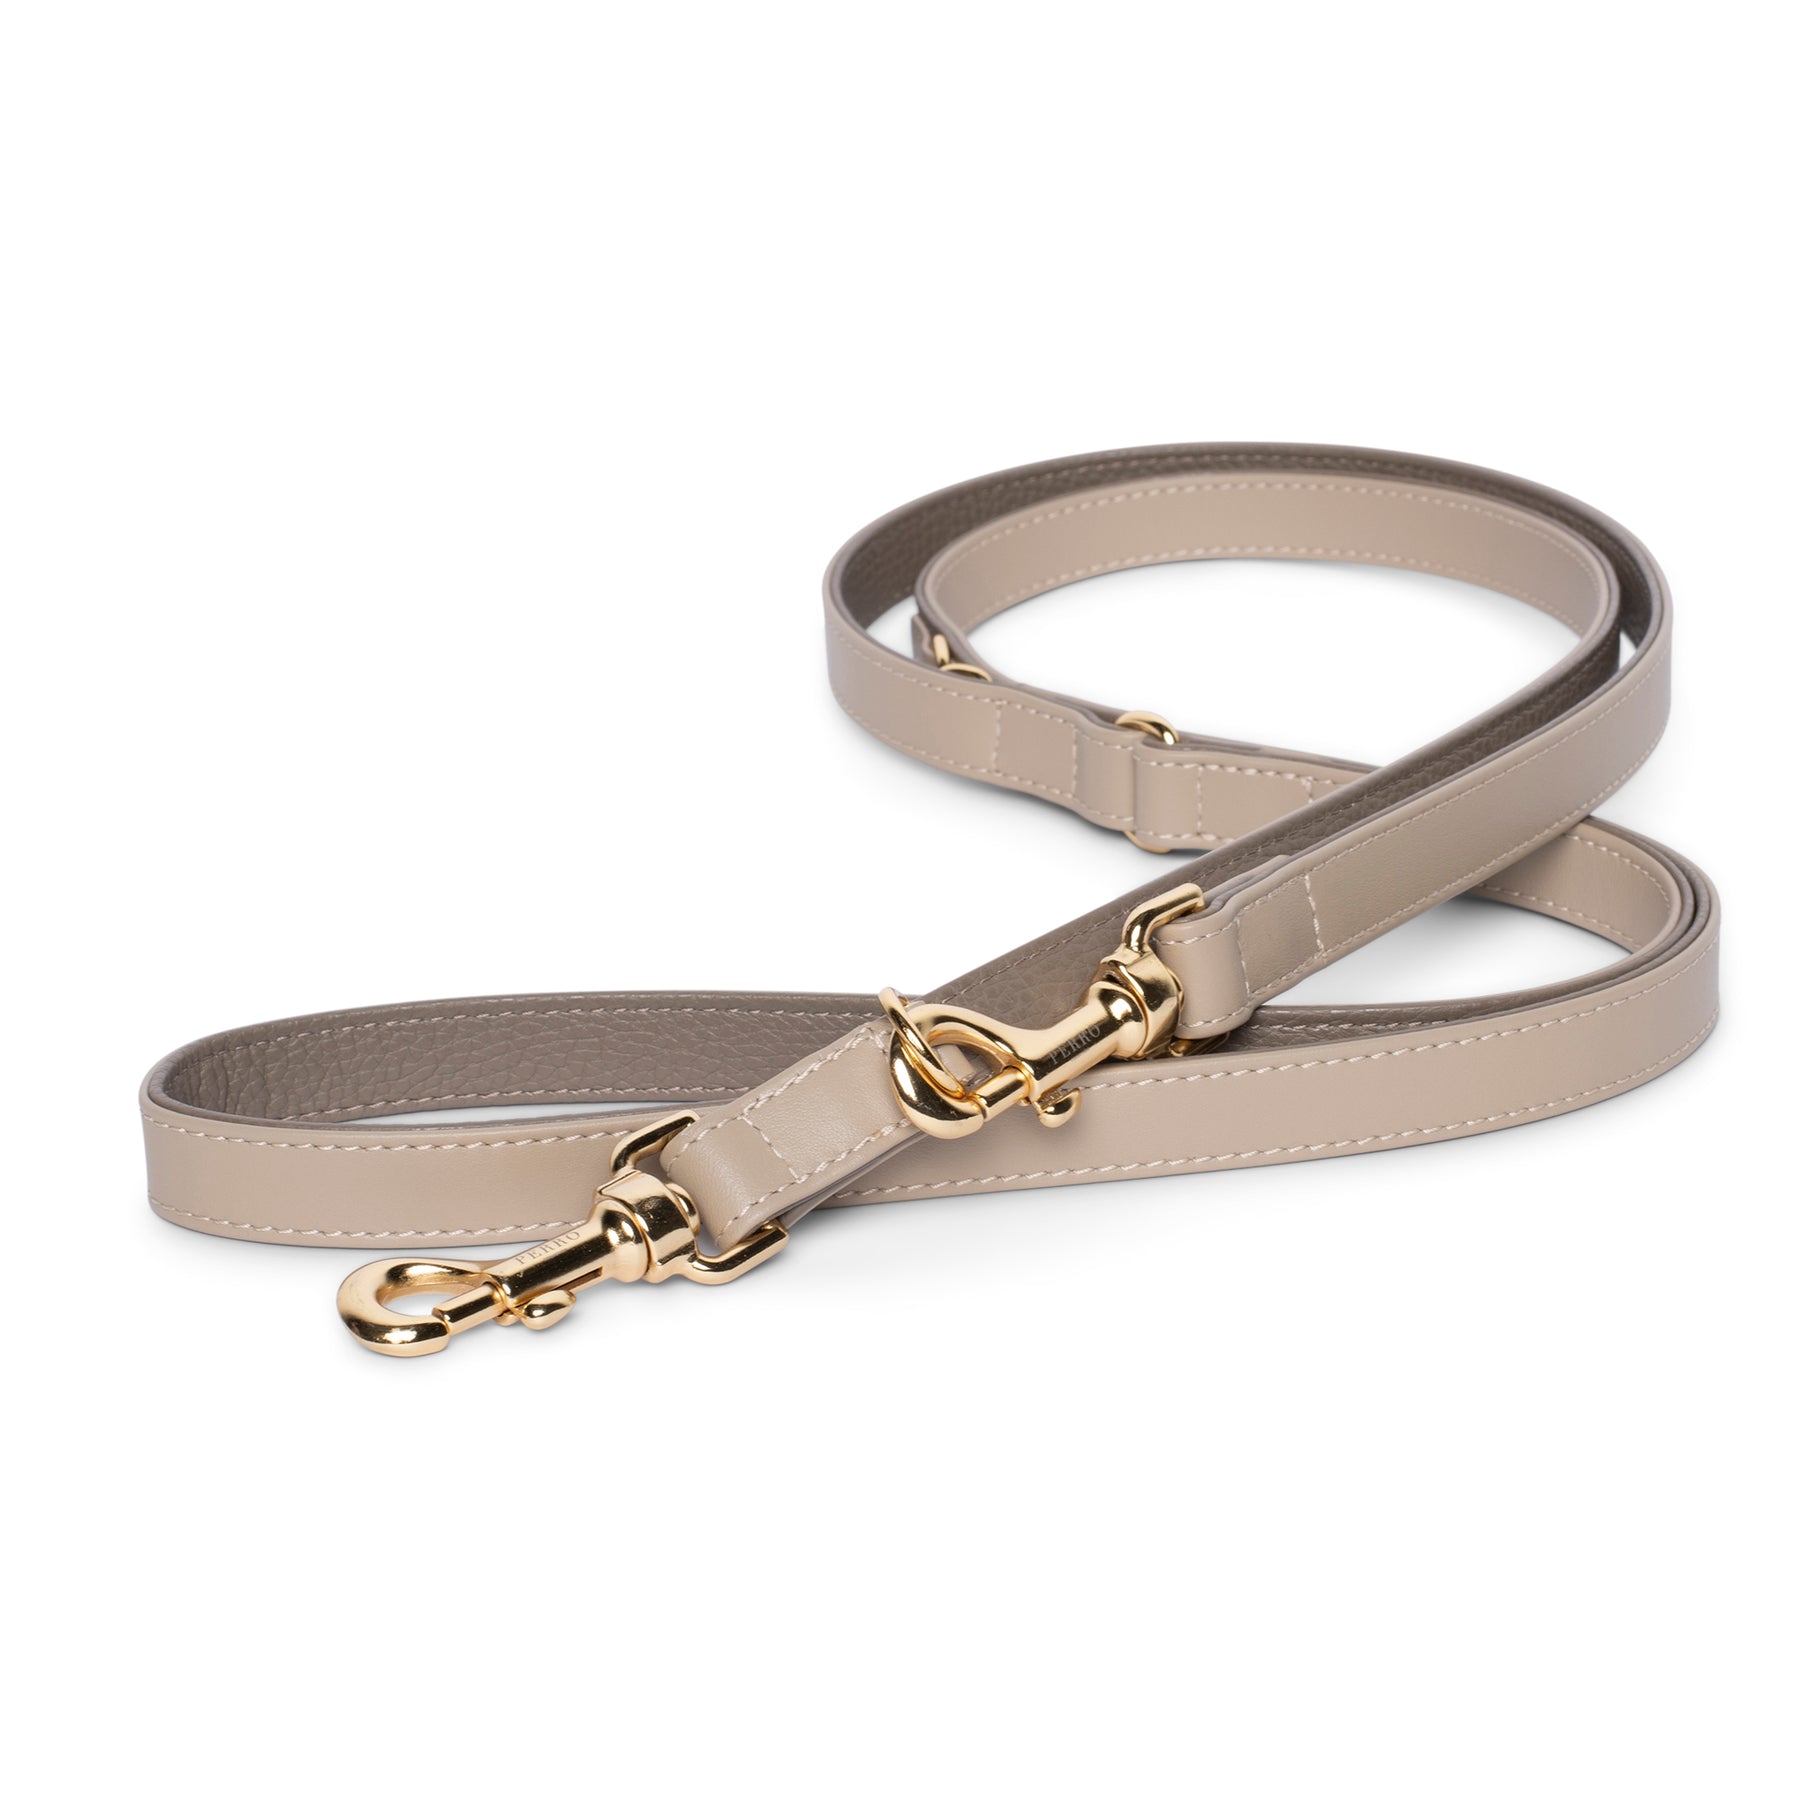 Special Edition Beige Leash